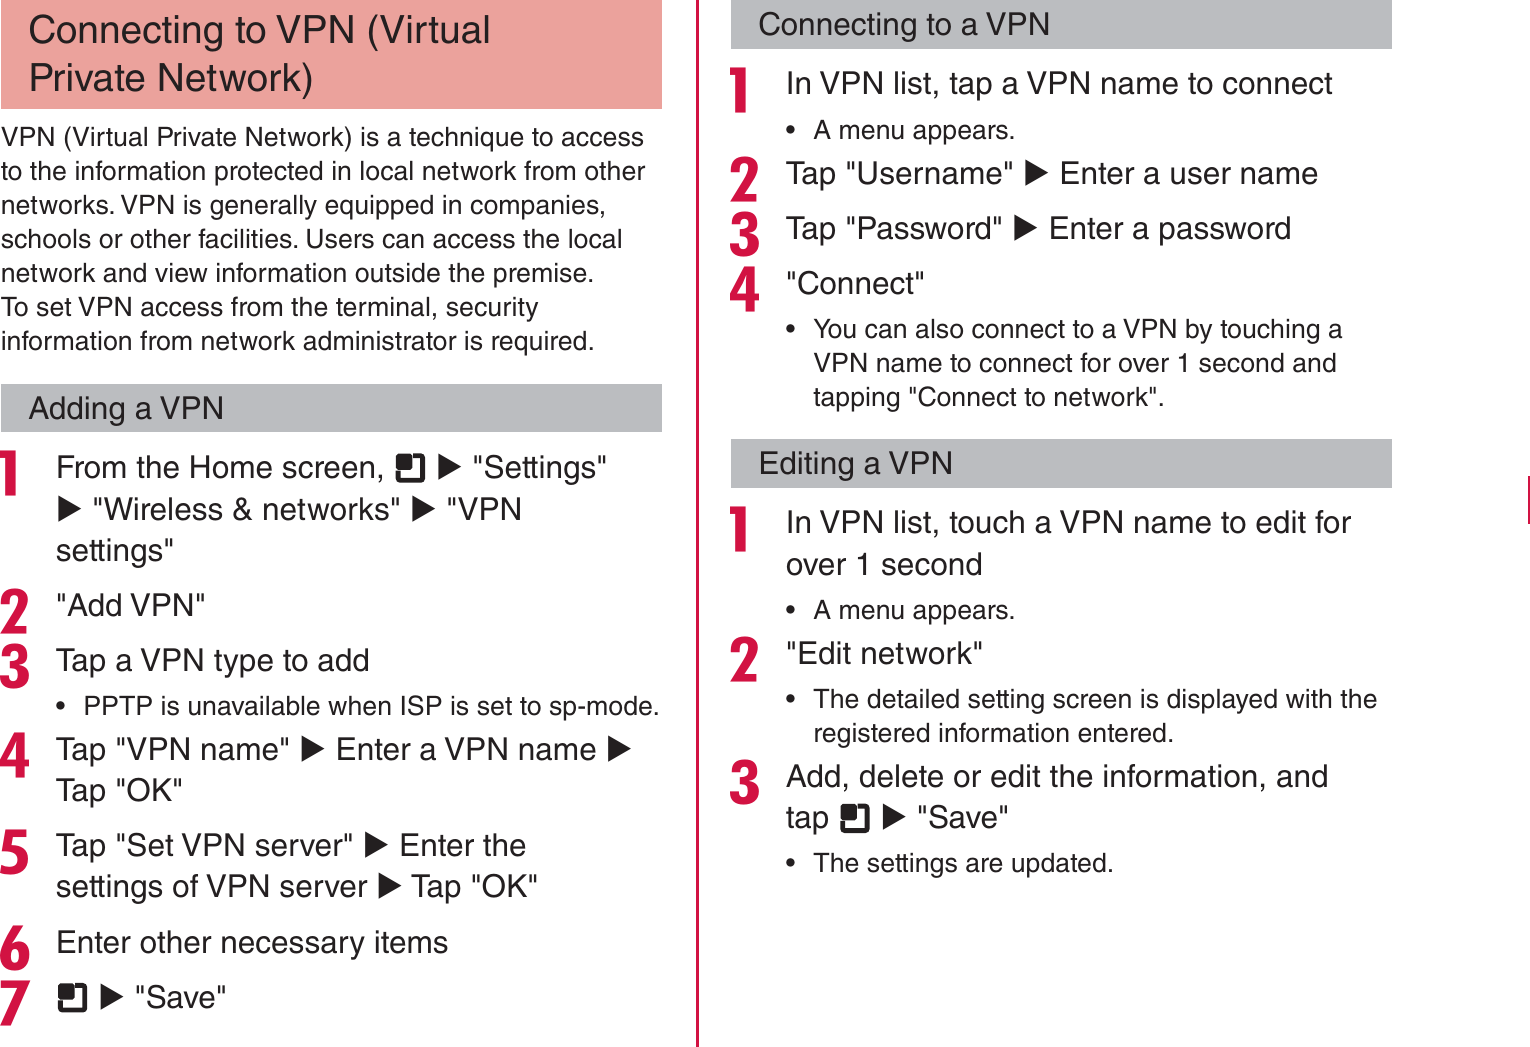 Connecting to VPN (Virtual Private Network)VPN (Virtual Private Network) is a technique to access to the information protected in local network from other networks. VPN is generally equipped in companies, schools or other facilities. Users can access the local network and view information outside the premise.To set VPN access from the terminal, security information from network administrator is required.Adding a VPN From the Home screen,   X &quot;Settings&quot; X &quot;Wireless &amp; networks&quot; X &quot;VPN settings&quot;&quot;Add VPN&quot;Tap a VPN type to add rPPTP is unavailable when ISP is set to sp-mode.Tap &quot;VPN name&quot; X Enter a VPN name X Tap &quot;OK&quot;Tap &quot;Set VPN server&quot; X Enter the settings of VPN server X Tap &quot;OK&quot;Enter other necessary items  X &quot;Save&quot;Connecting to a VPN In VPN list, tap a VPN name to connect rA menu appears.Tap &quot;Username&quot; X Enter a user nameTap &quot;Password&quot; X Enter a password&quot;Connect&quot; rYou can also connect to a VPN by touching a VPN name to connect for over 1 second and tapping &quot;Connect to network&quot;.Editing a VPN In VPN list, touch a VPN name to edit for over 1 second rA menu appears.&quot;Edit network&quot; rThe detailed setting screen is displayed with the registered information entered.Add, delete or edit the information, and tap   X &quot;Save&quot; rThe settings are updated.103Settings